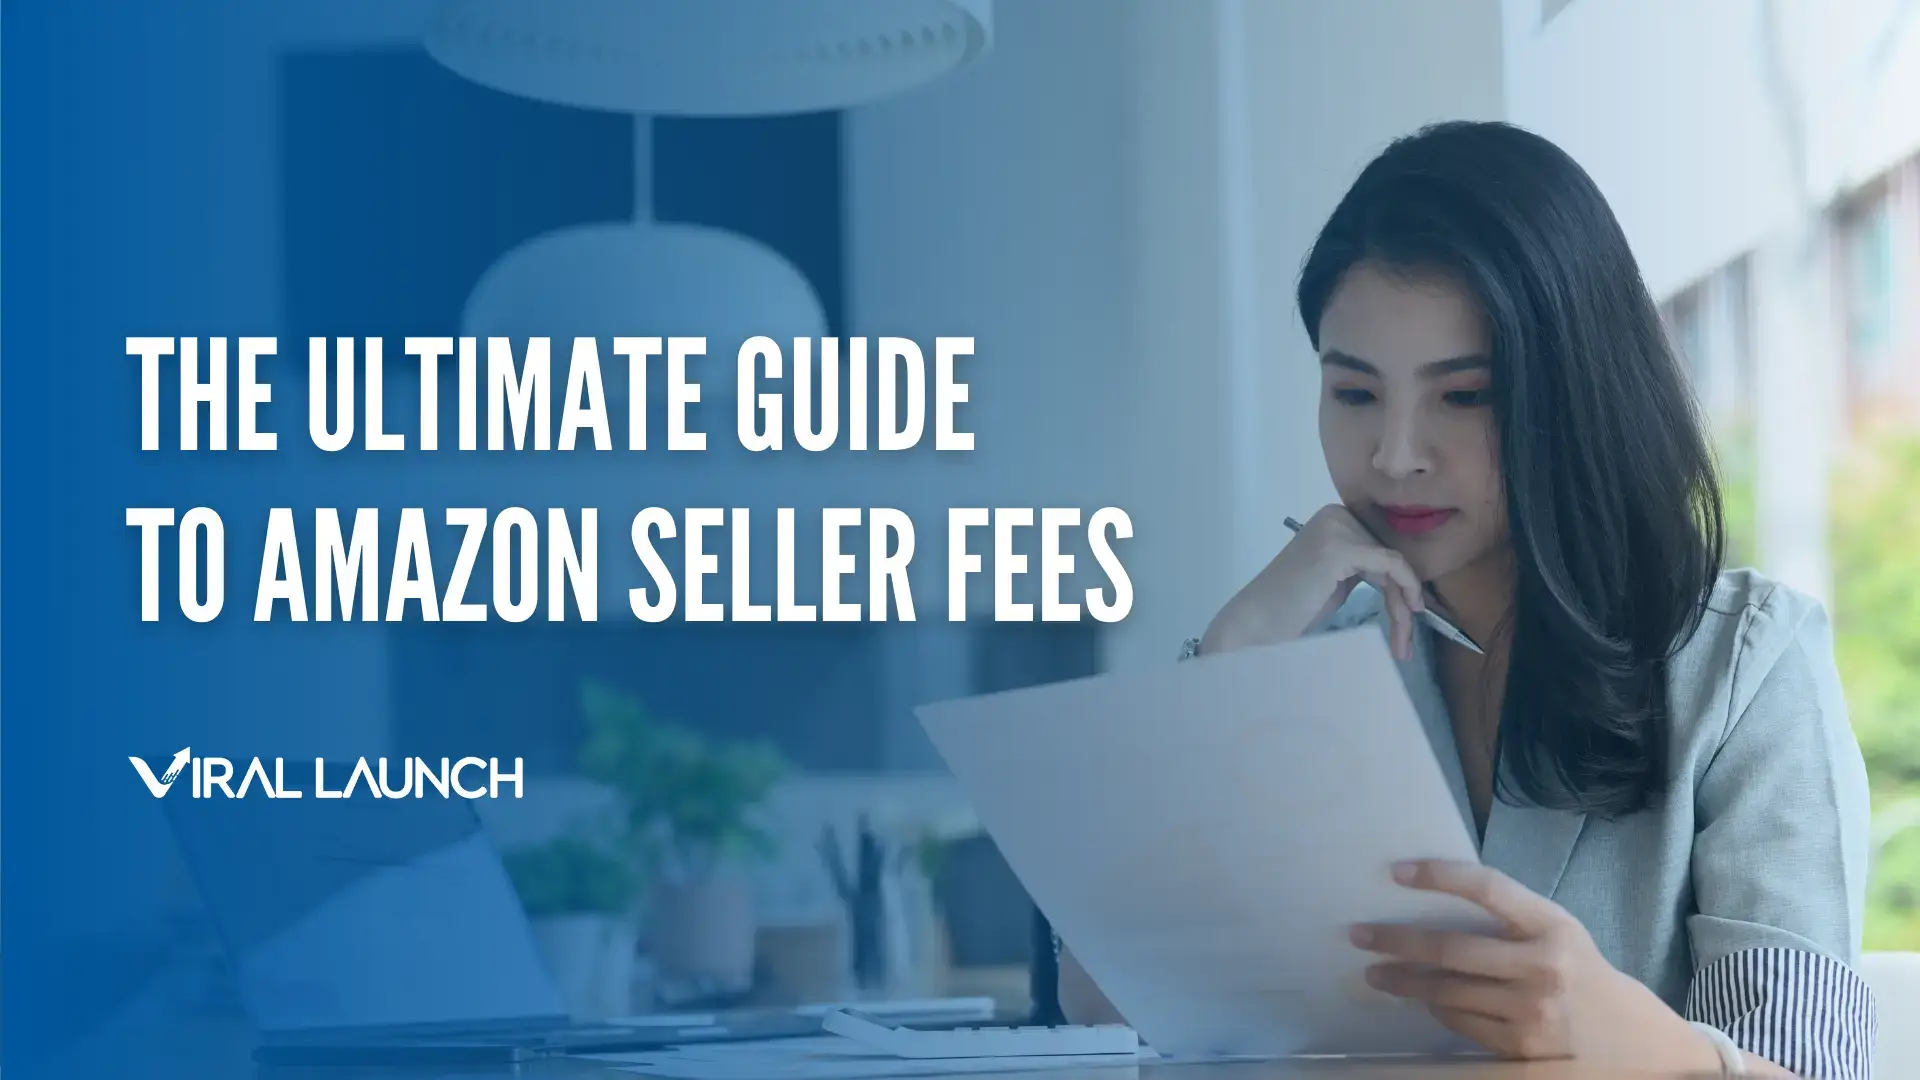 Ultimate guide to Amazon seller fees from Viral Launch.